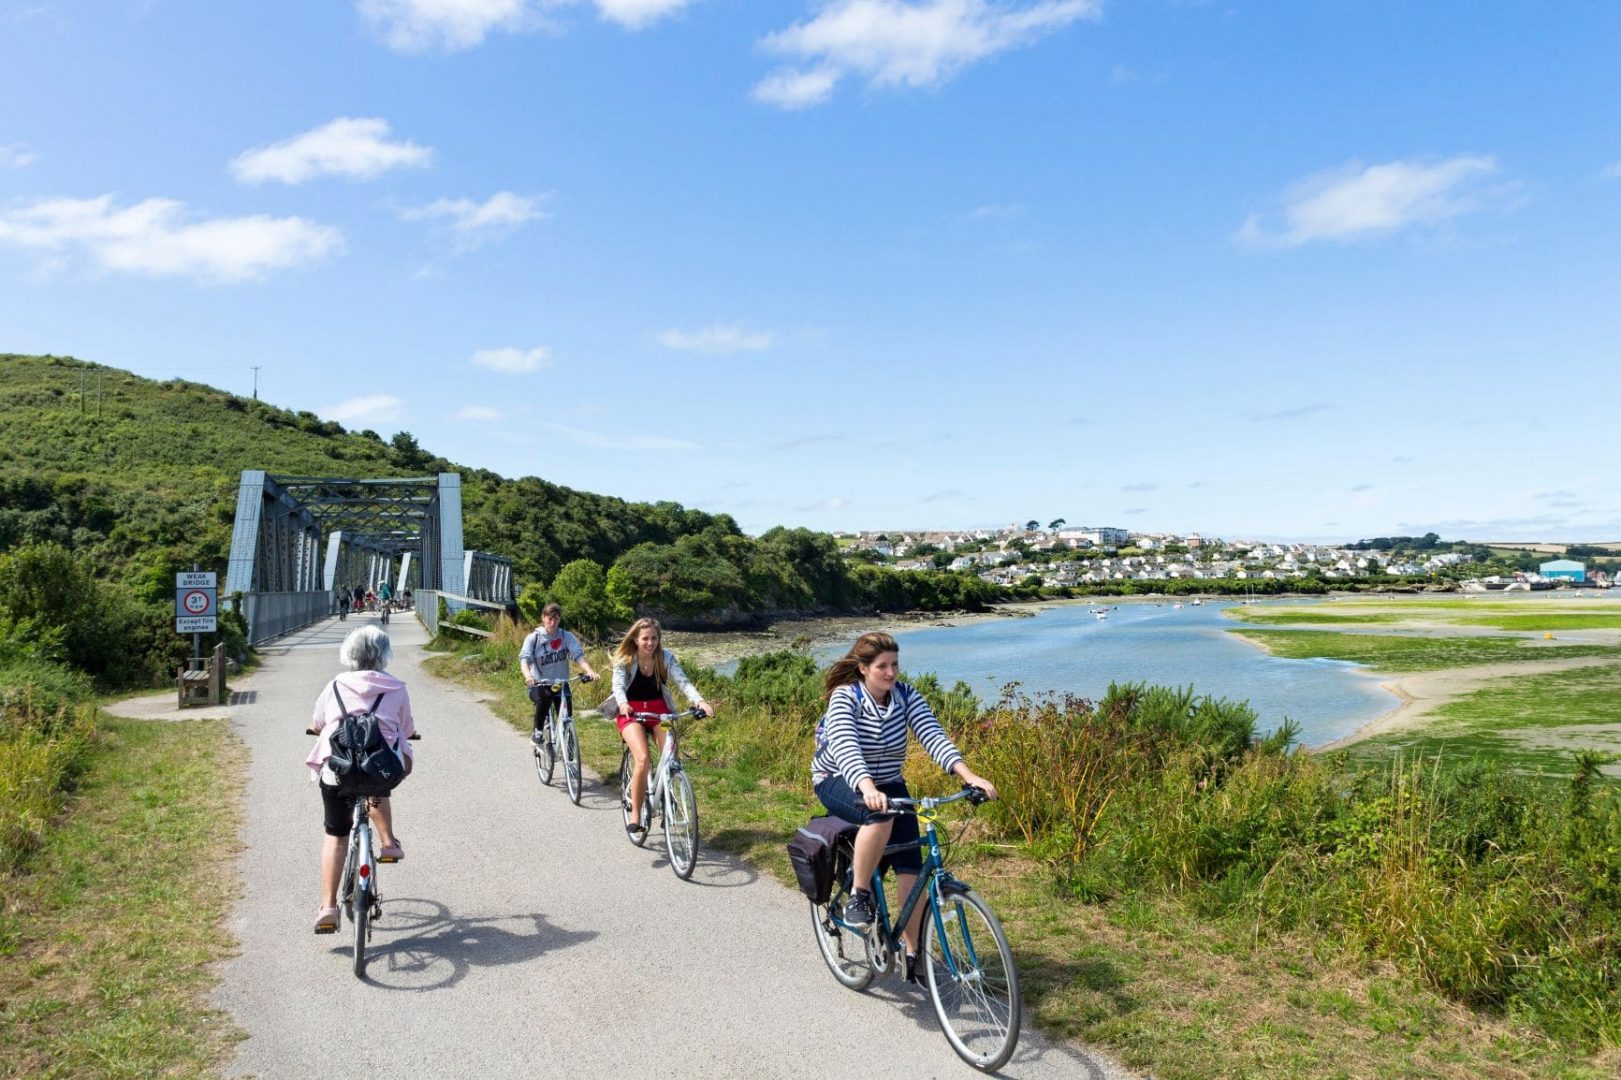 Three young people cycle towards the camera and away from a railway-style bridge over a body of water below blue skies